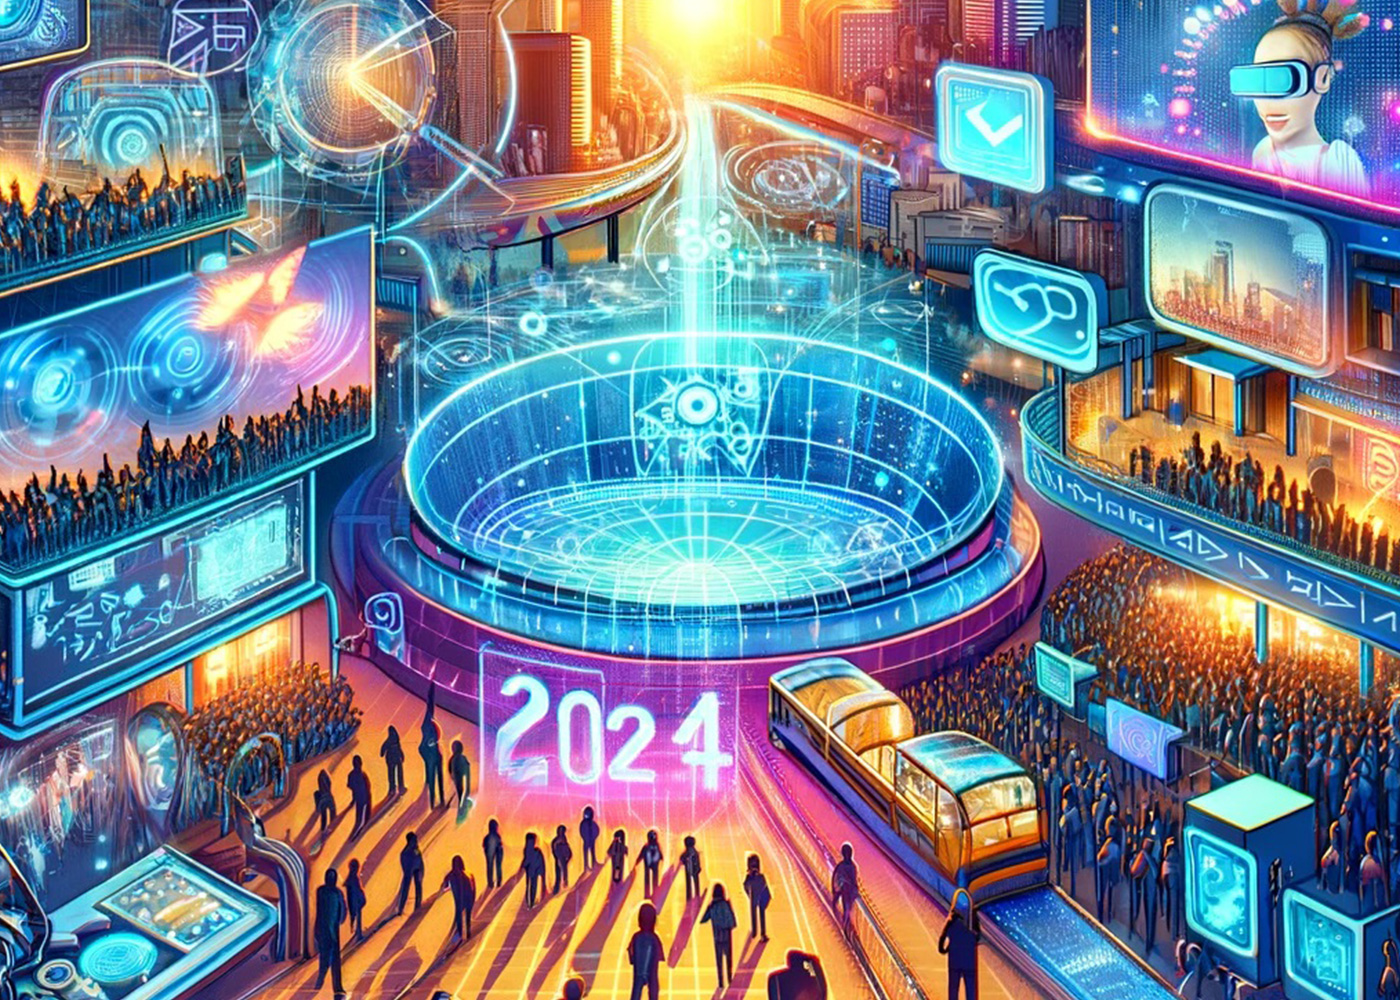 Experiential Marketing Trends That Will Work in 2024